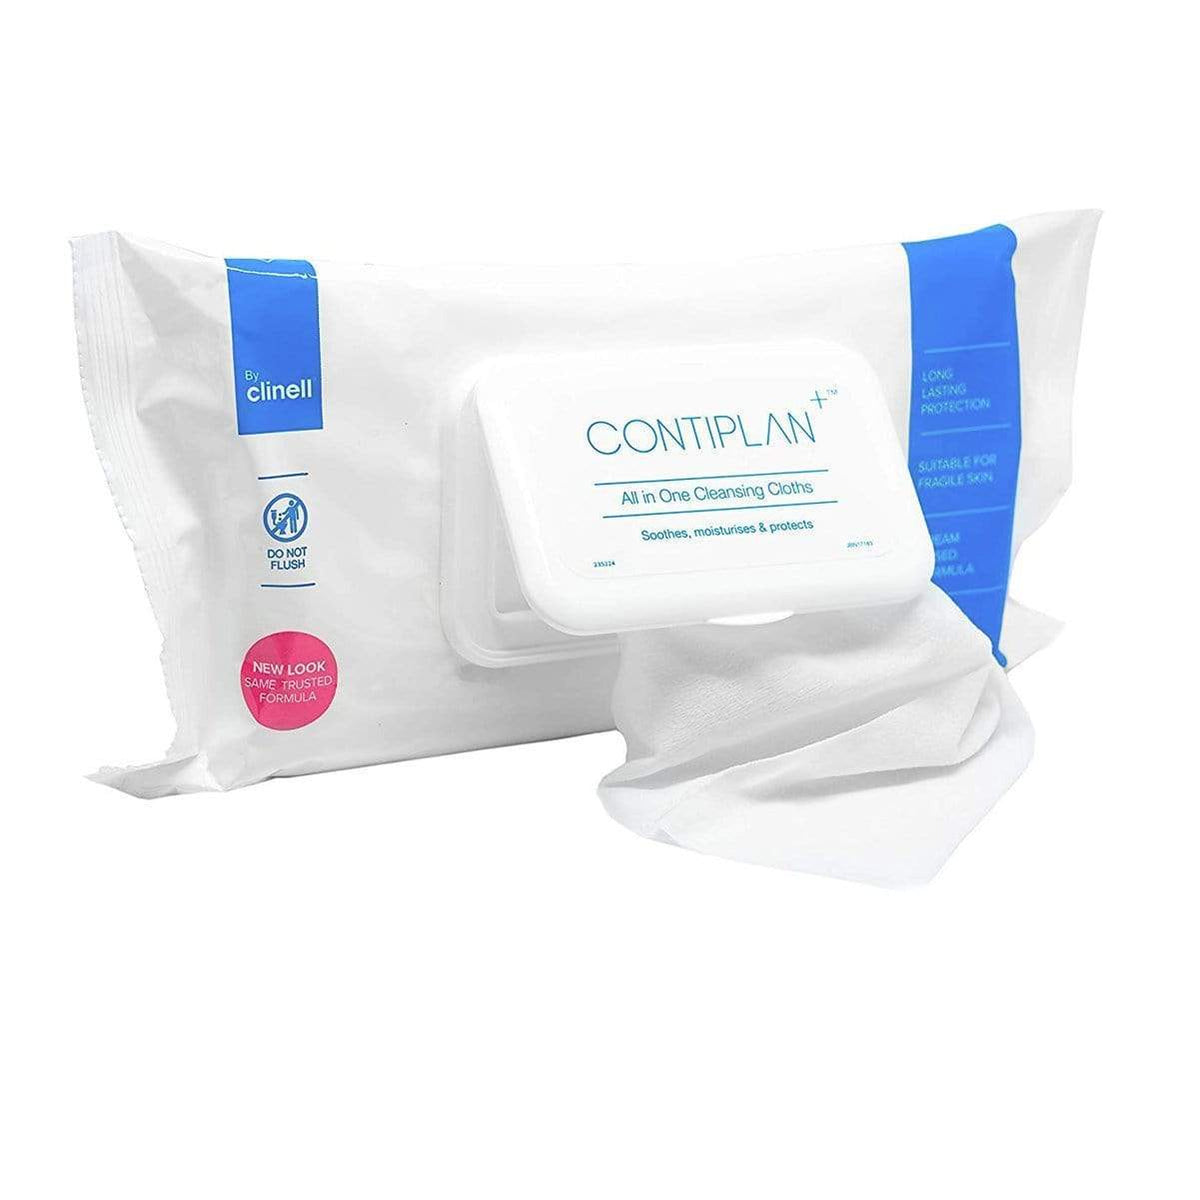 Clinell Contiplan Continence Cleansing Wipes